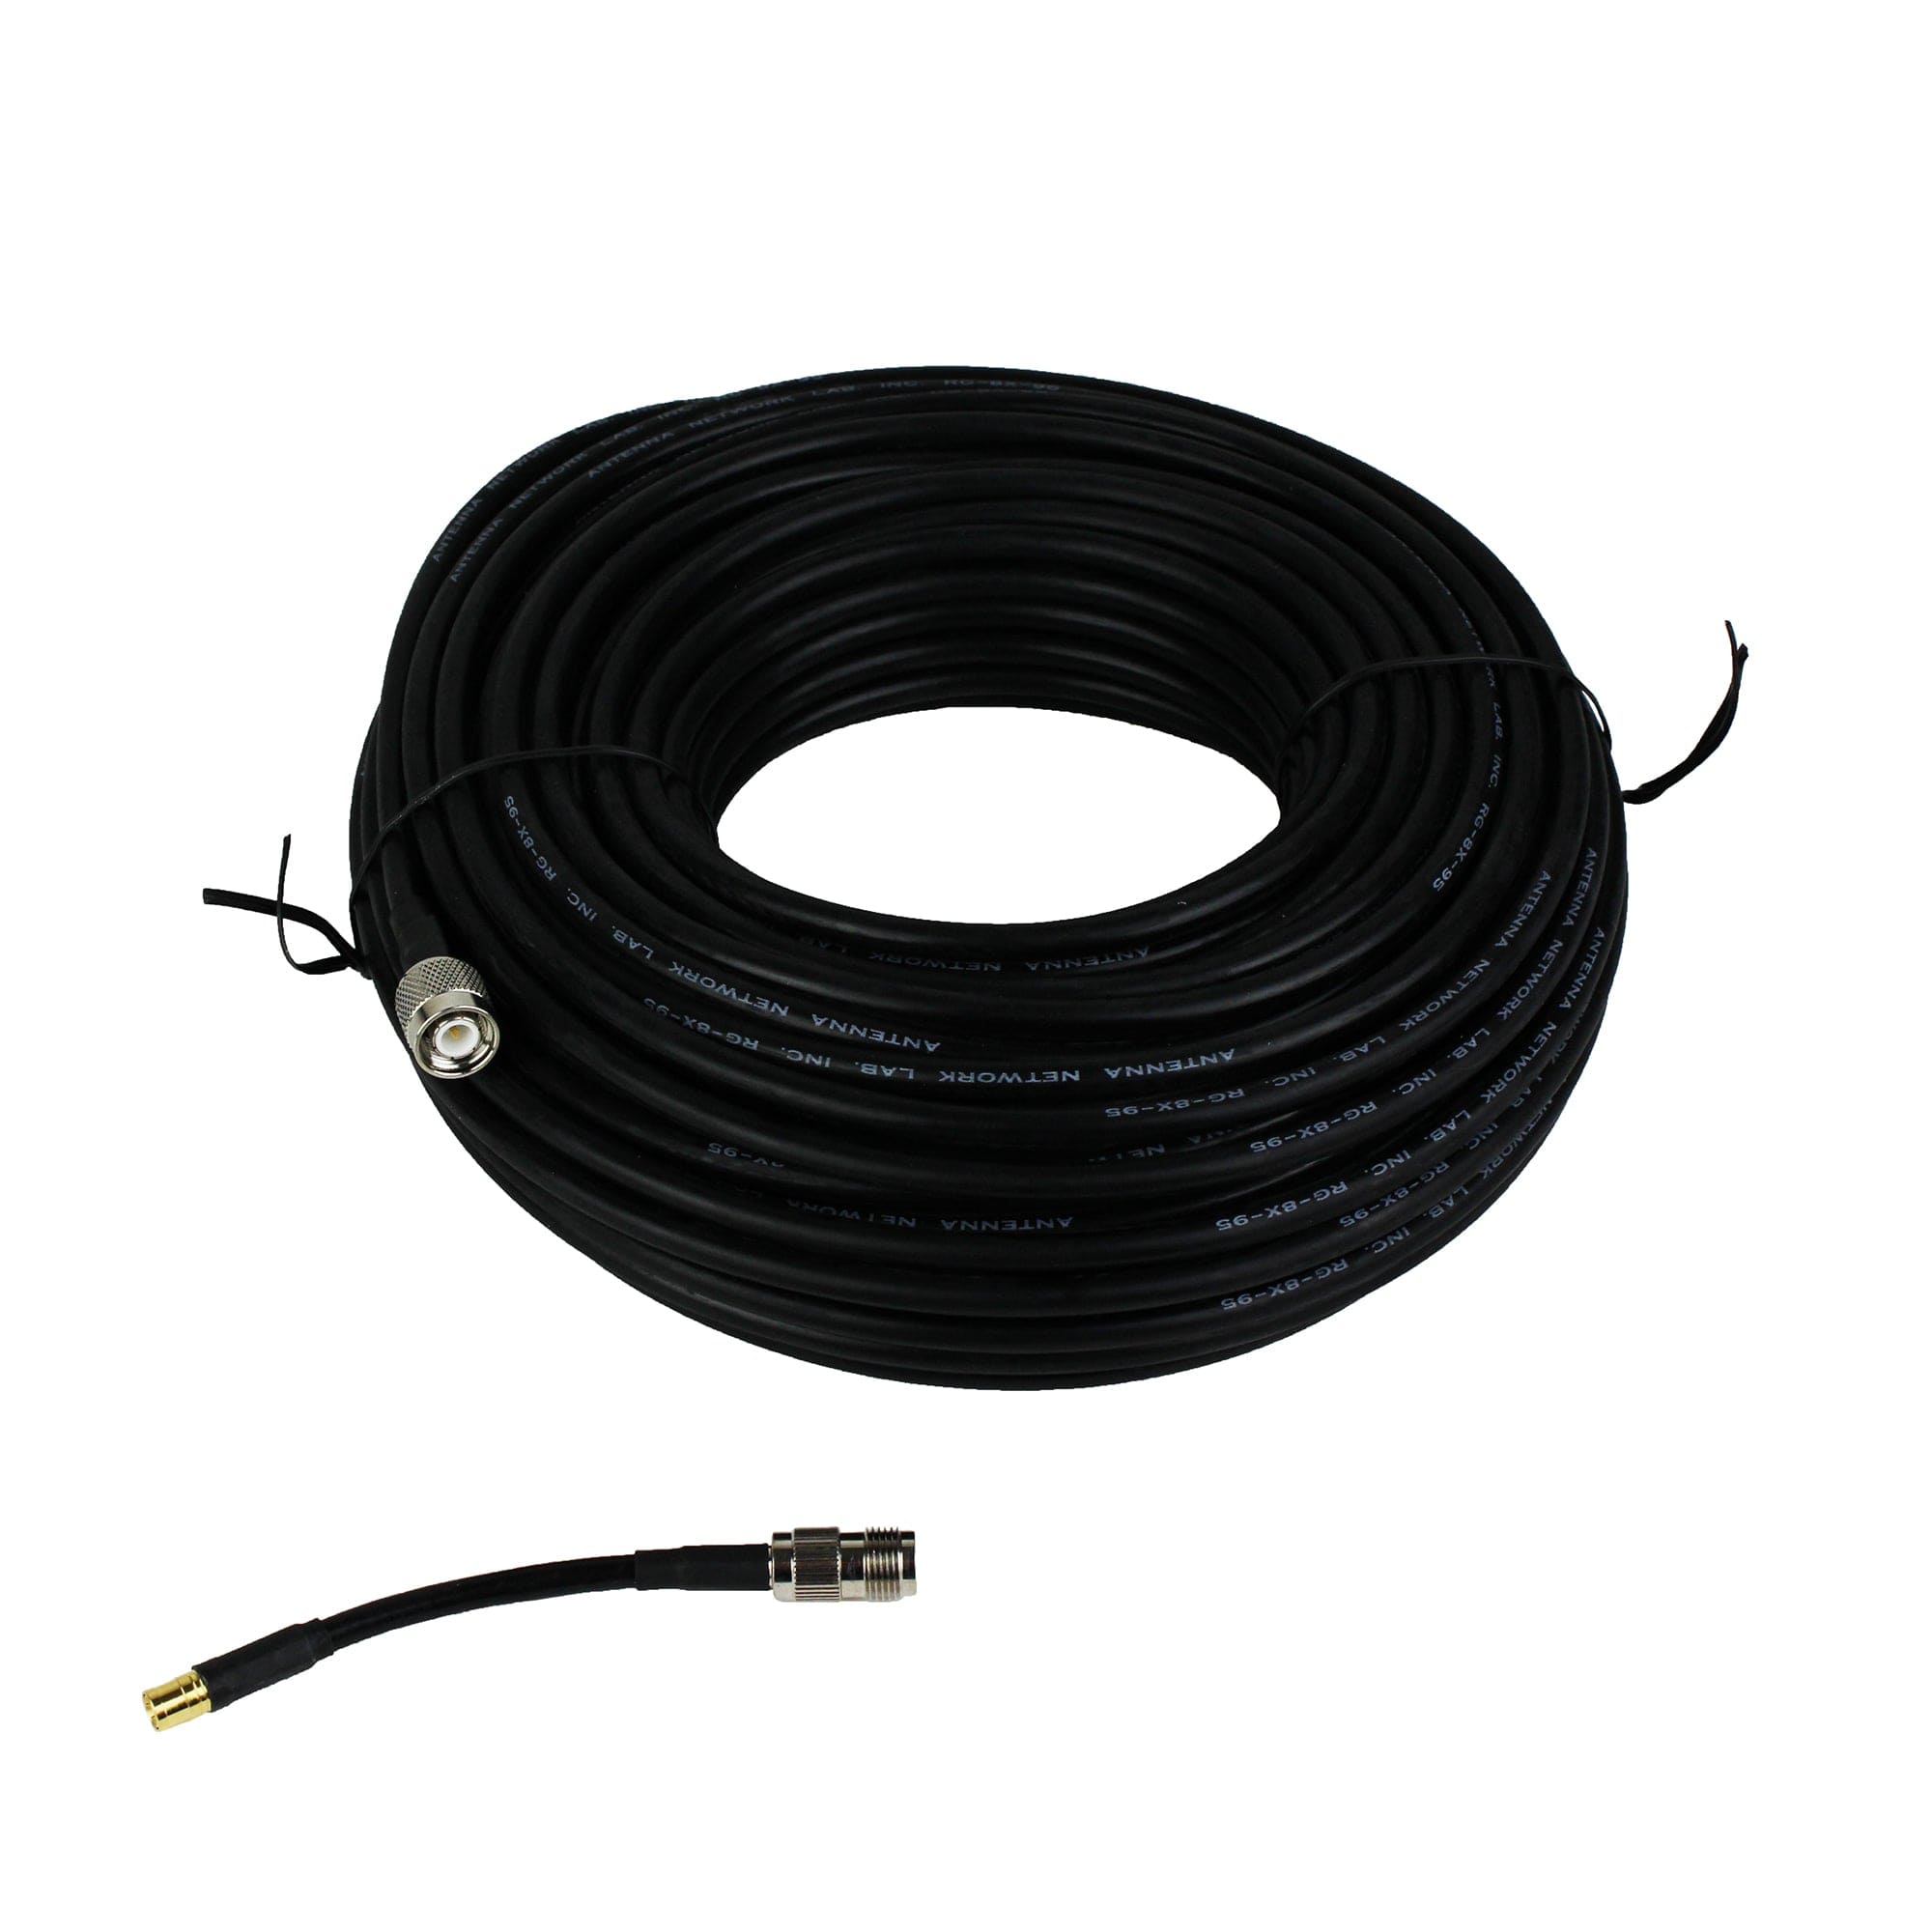 Shakespeare SRC-90 RG-8X 90' SiriusXM Antenna Cable Kit for SRA-25 & SRA-40